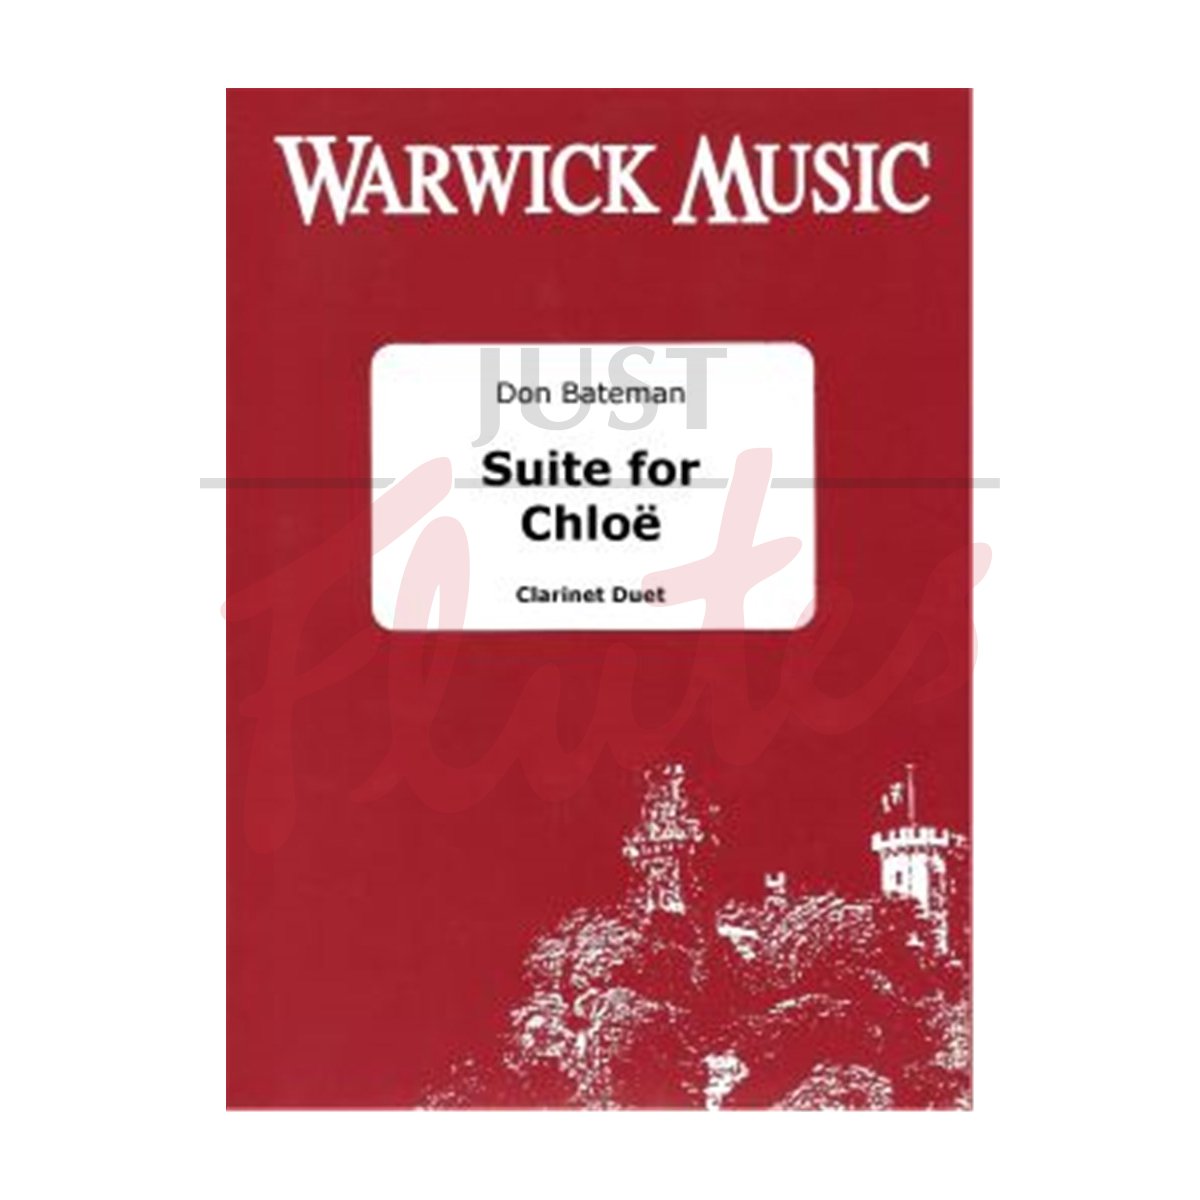 Suite for Chloë for Clarinet Duet